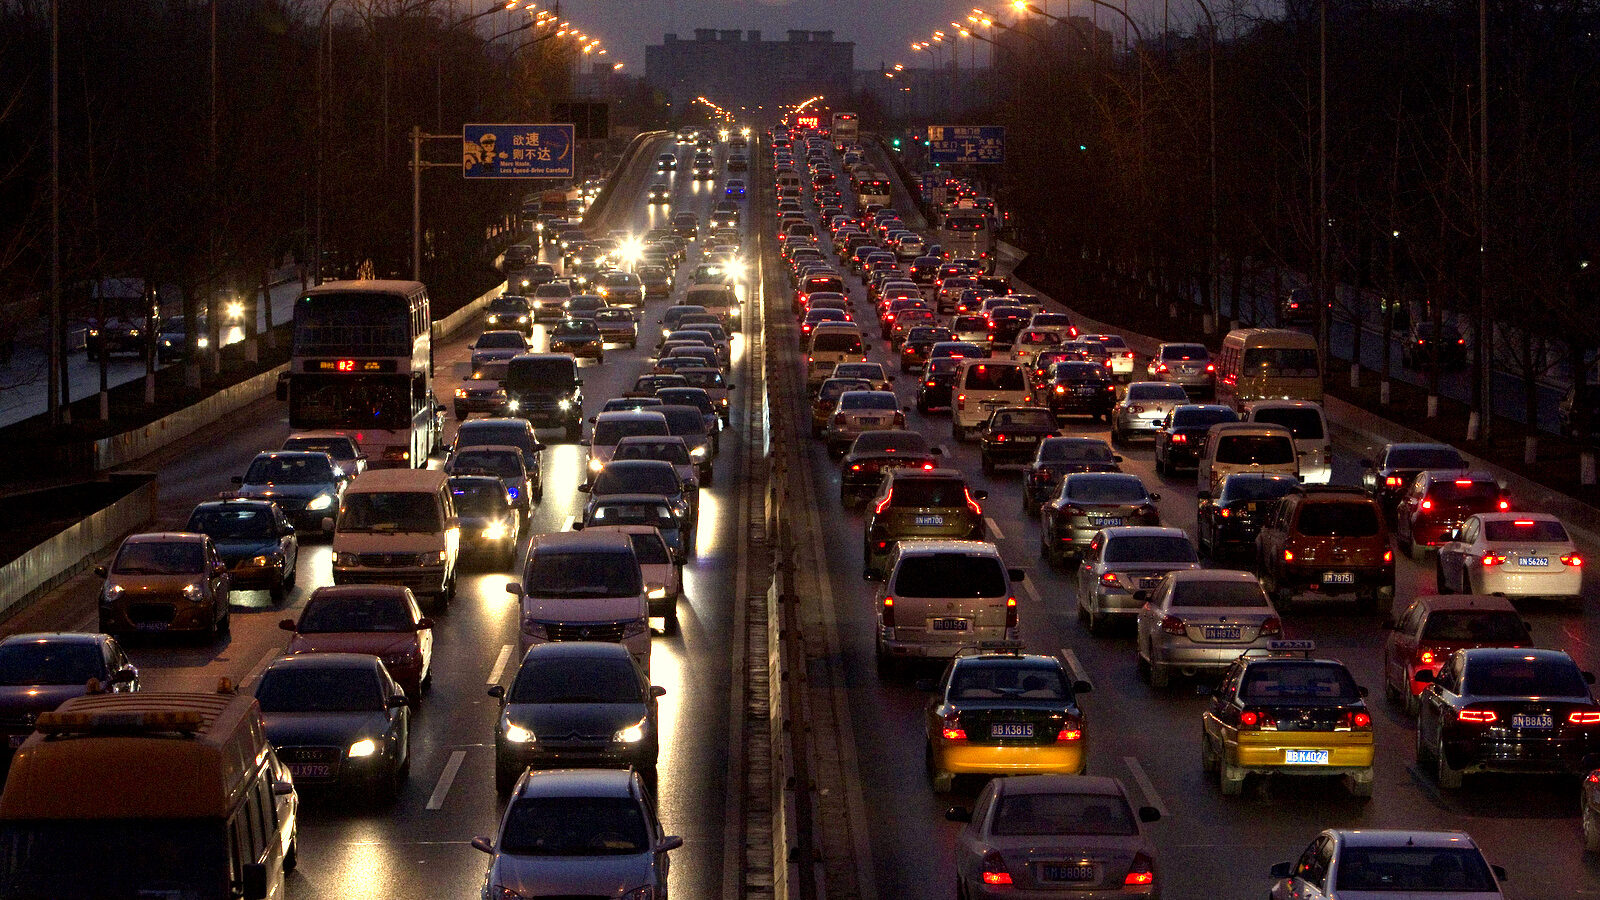 Vehicles pack a main road during rush hour in Beijing. China, which overtook the U.S. in late 2010 as the world's largest oil importer, has the single biggest influence on global demand for fuels. (AP Photo/Alexander F. Yuan)